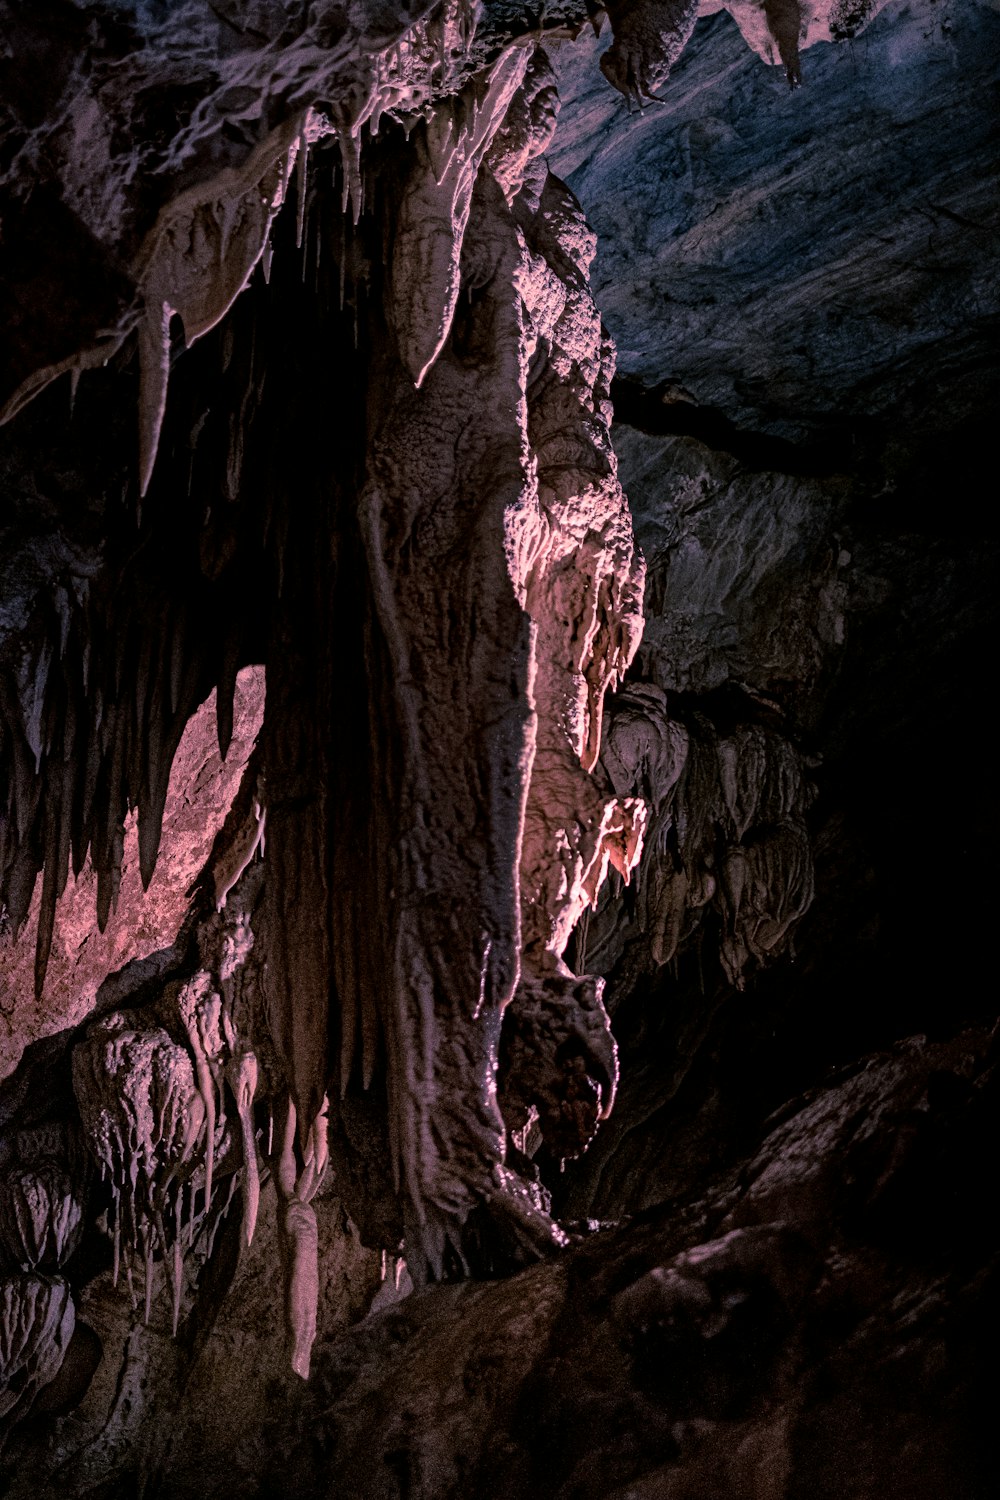 a cave filled with lots of cave like formations